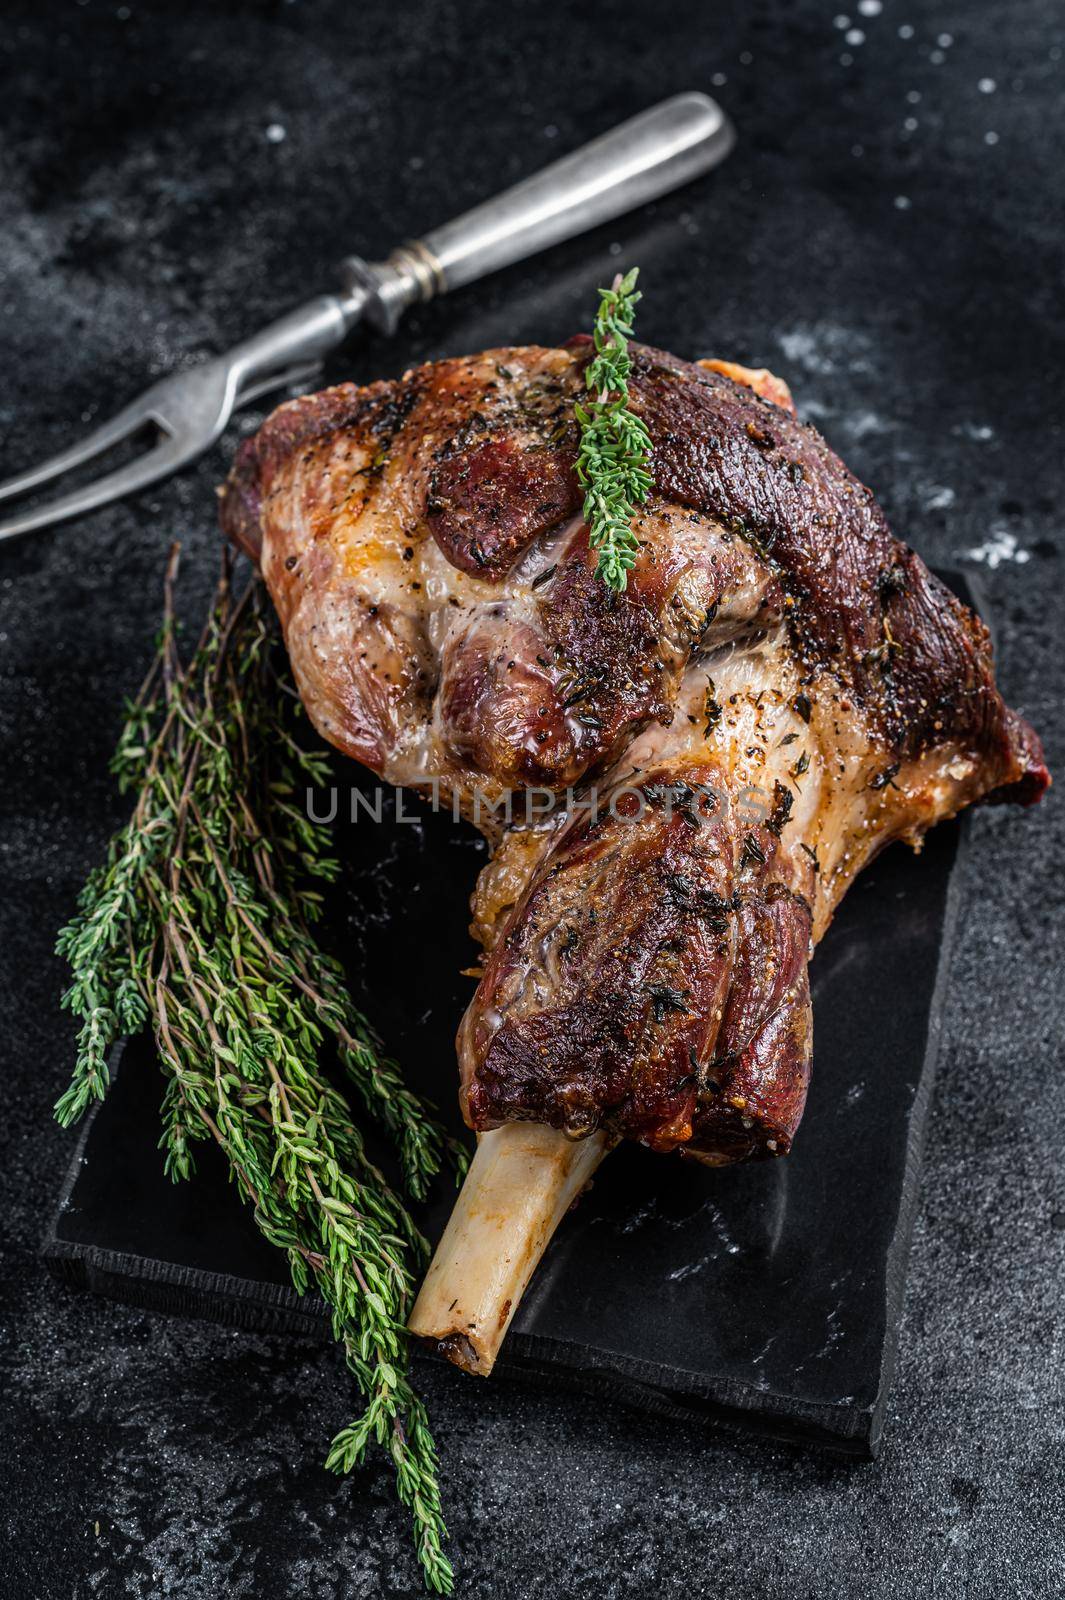 Oven Roasted lamb mutton whole leg with thyme. Black background. Top view.